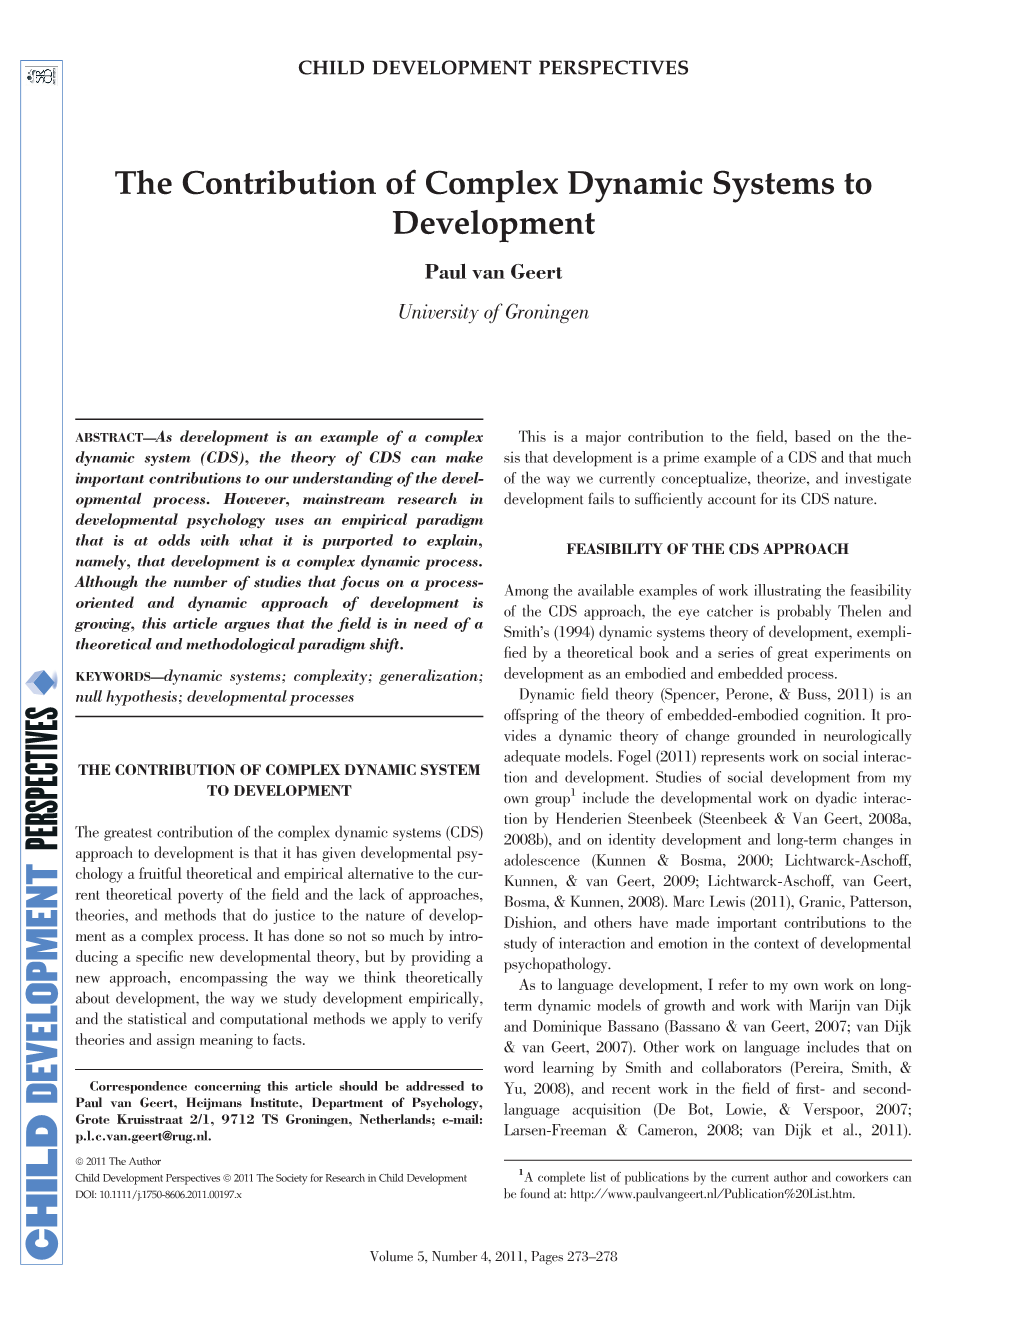 The Contribution of Complex Dynamic Systems to Development Paul Van Geert University of Groningen